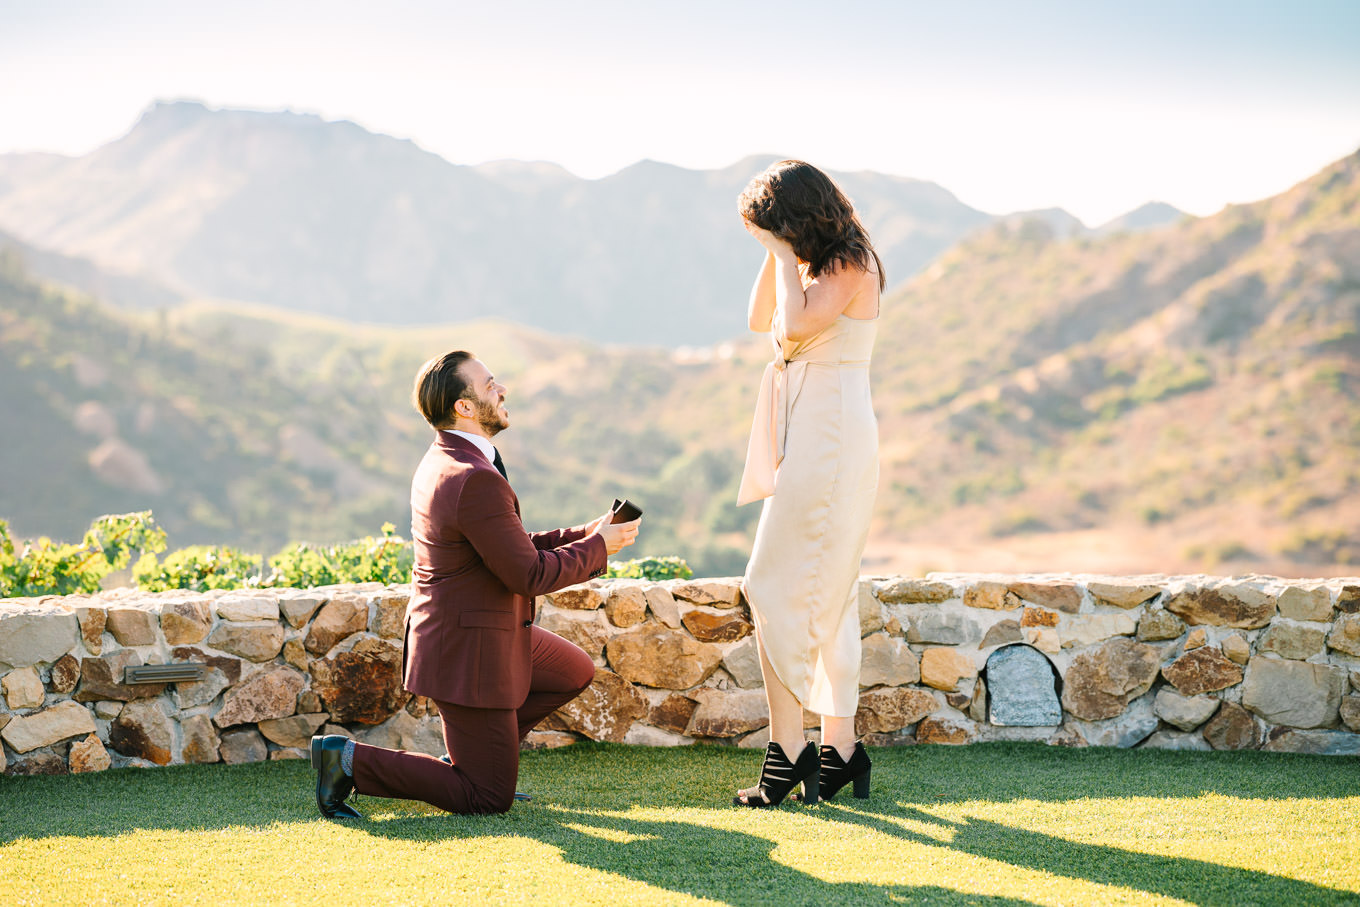 Cielo Farms proposal in Malibu | Wedding and elopement photography roundup | Los Angeles and Palm Springs  photographer | #losangeleswedding #palmspringswedding #elopementphotographer

Source: Mary Costa Photography | Los Angeles